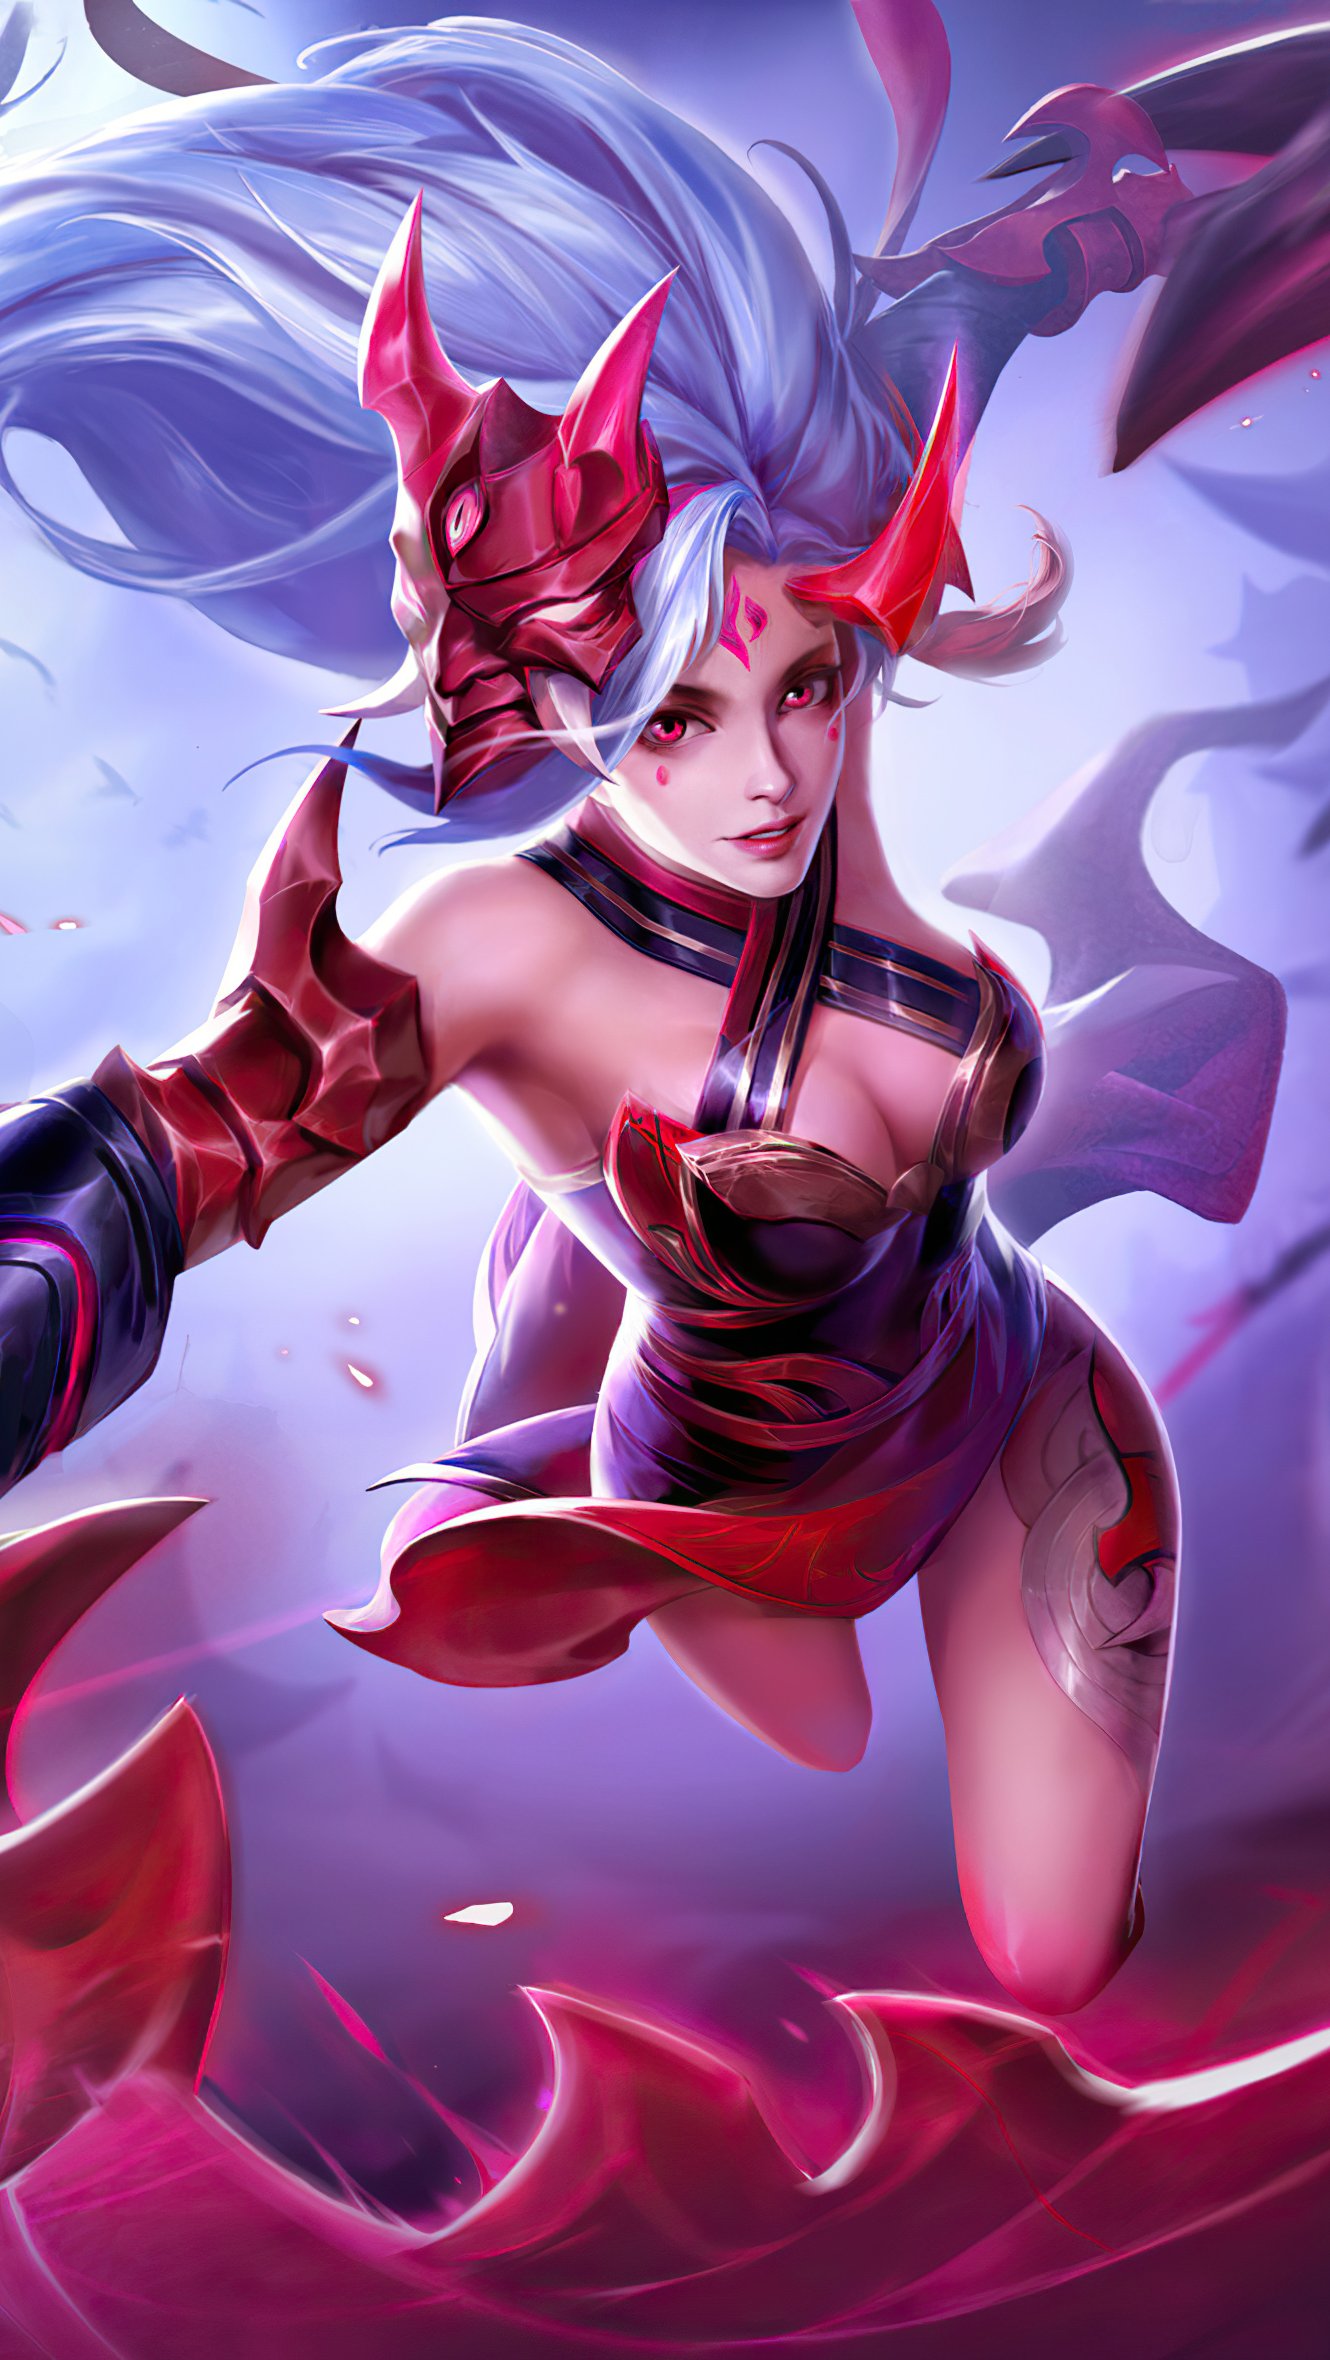 Yena from Arena of Valor Wallpaper 4k Ultra HD ID:6490